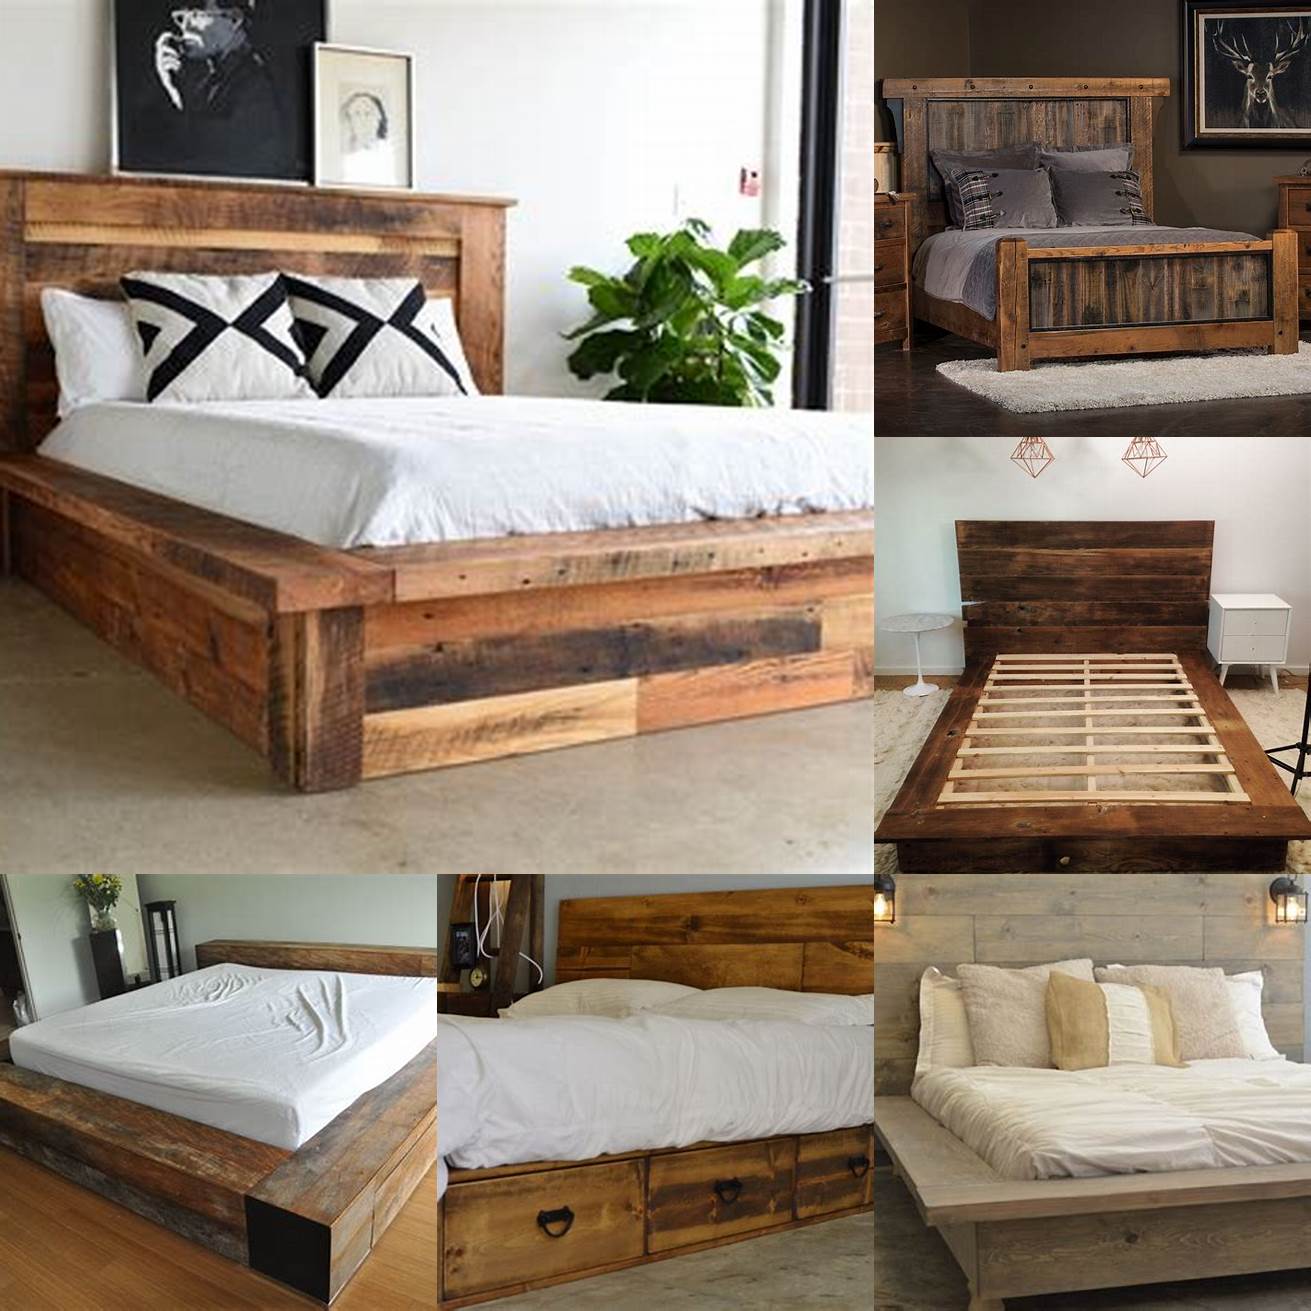 A rustic platform bed with a reclaimed wood headboard